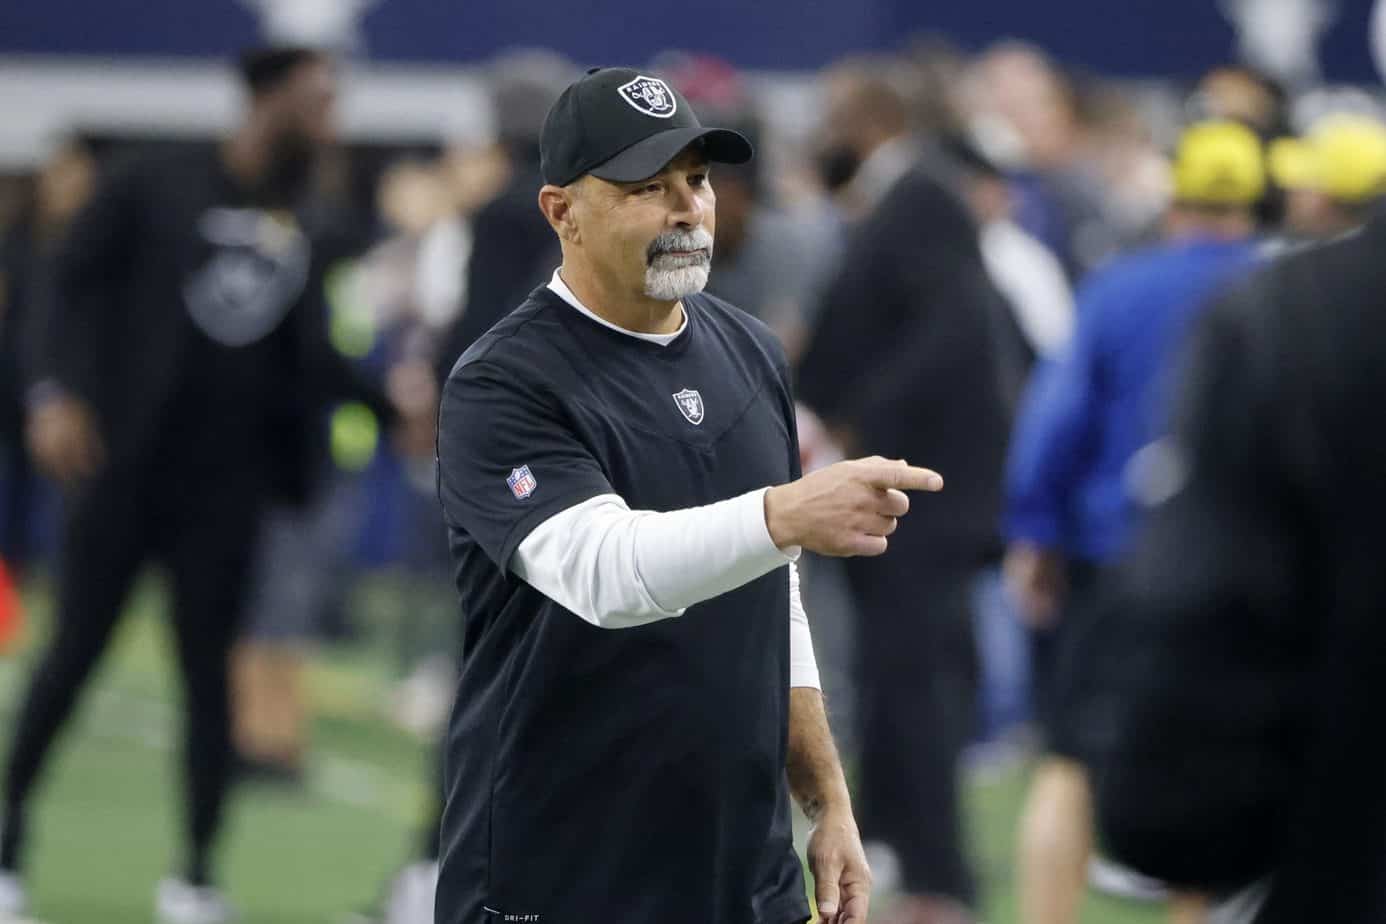 Las Vegas Raiders interim head coach Rich Bisaccia had an awesome gesture for his players after the loss against the Bengals in the Wild Card Round